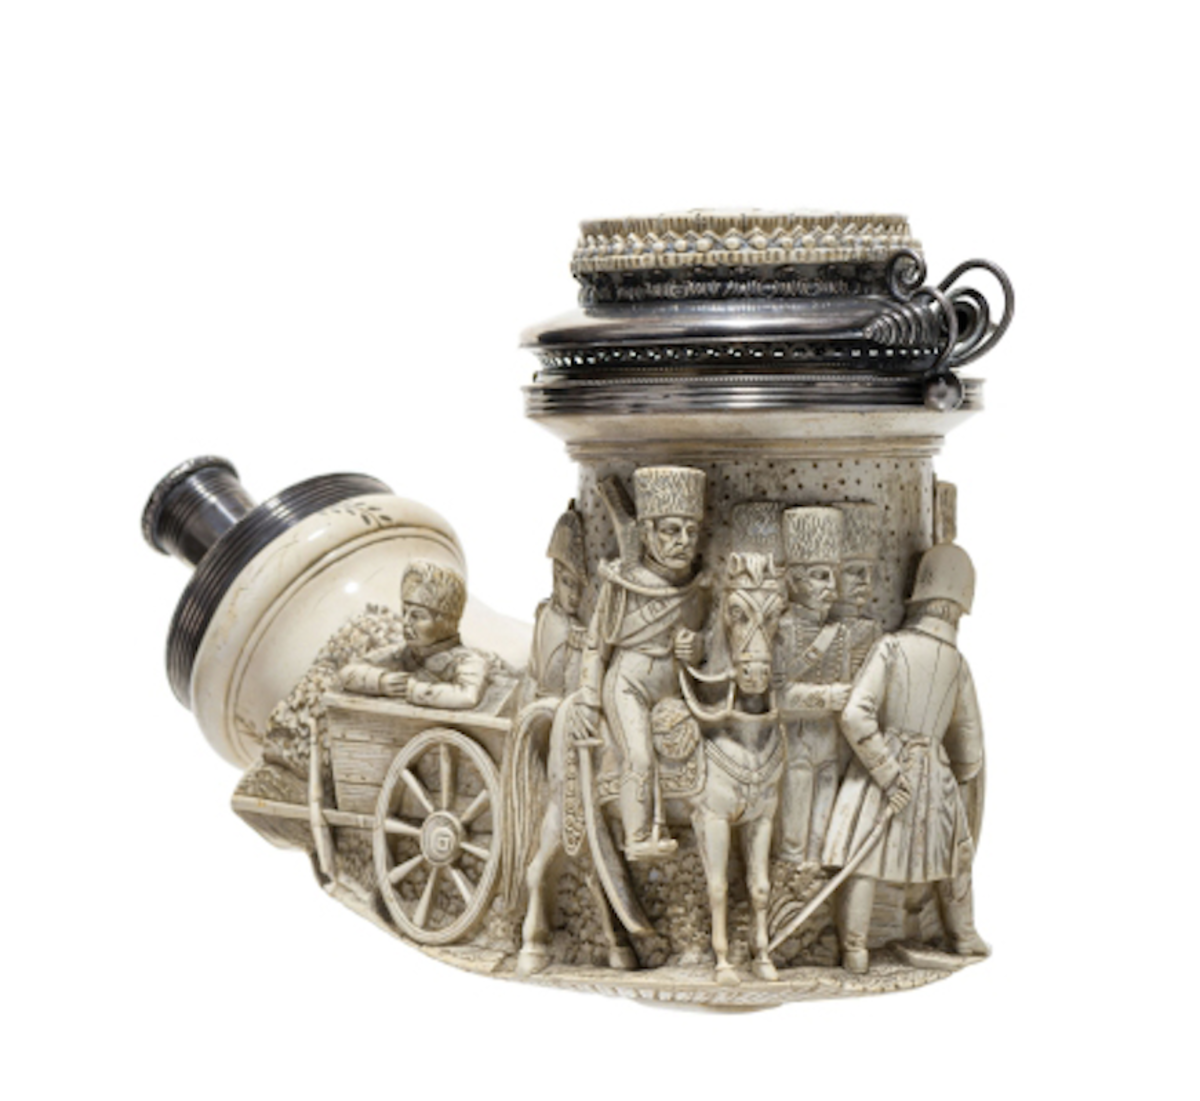 Meerschaum pipe bowl depicting Hungarian soldiers readying for war, c. 1850.